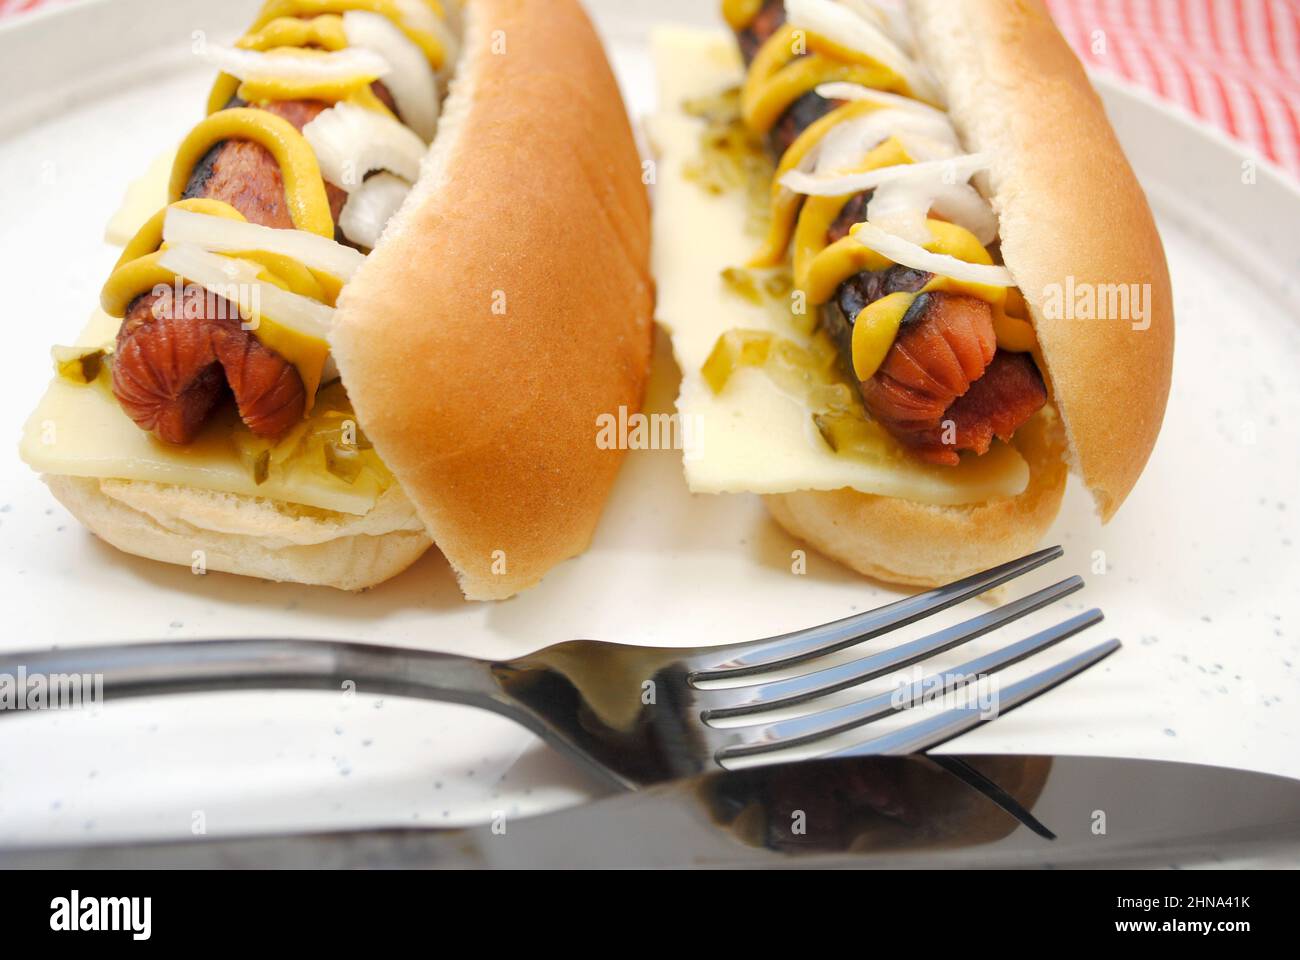 Hot Dogs with Onions, Relish and Mustard on a Plate Stock Photo